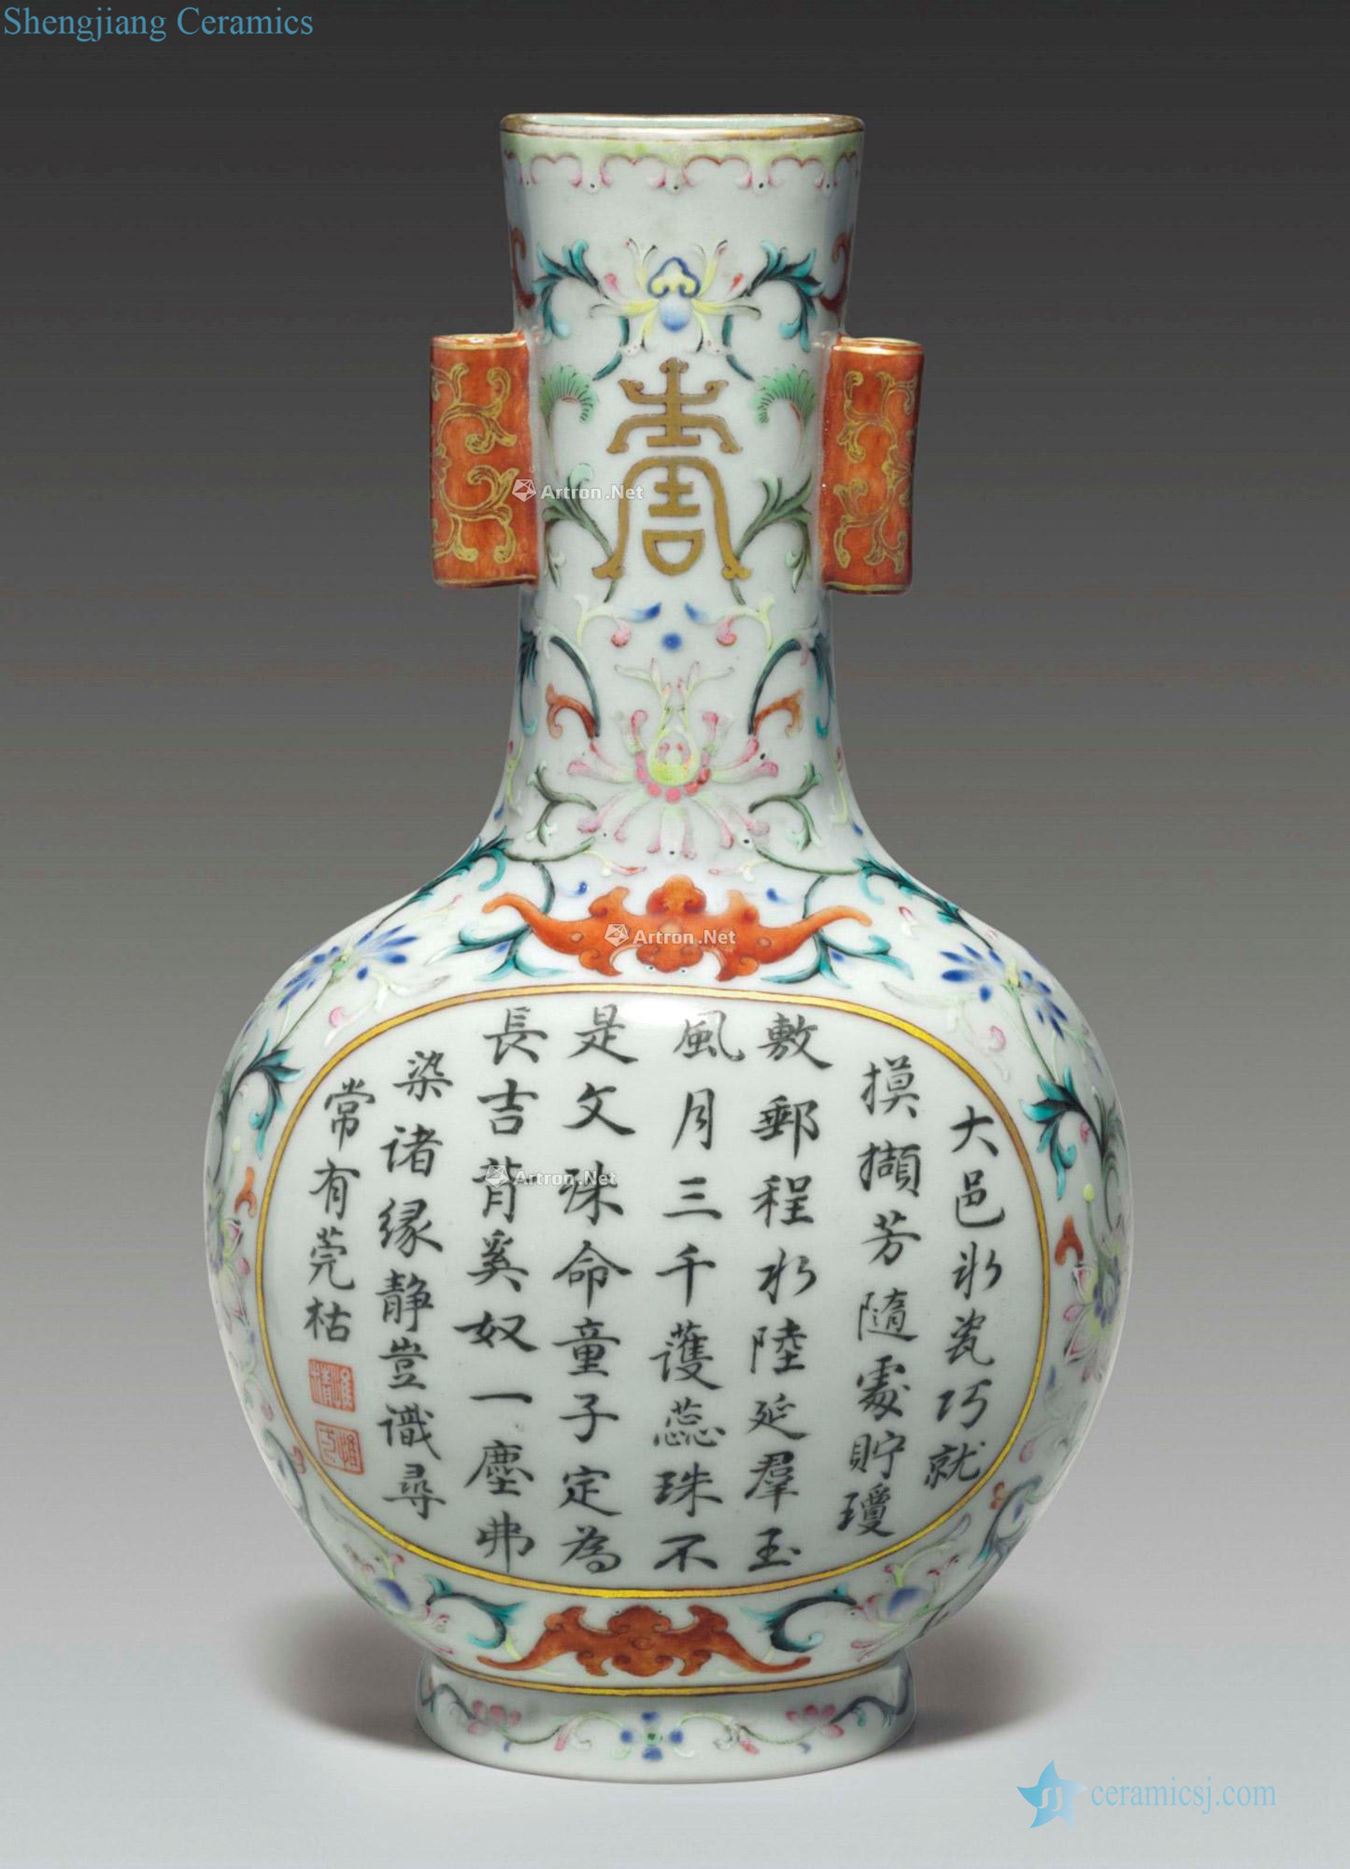 QIANLONG SIX ~ CHARACTER SEAL MARK IN IRON - RED AND OF THE PERIOD (1736 ~ 1795) A FAMILLE ROSE VASE - FORM WALL VASE